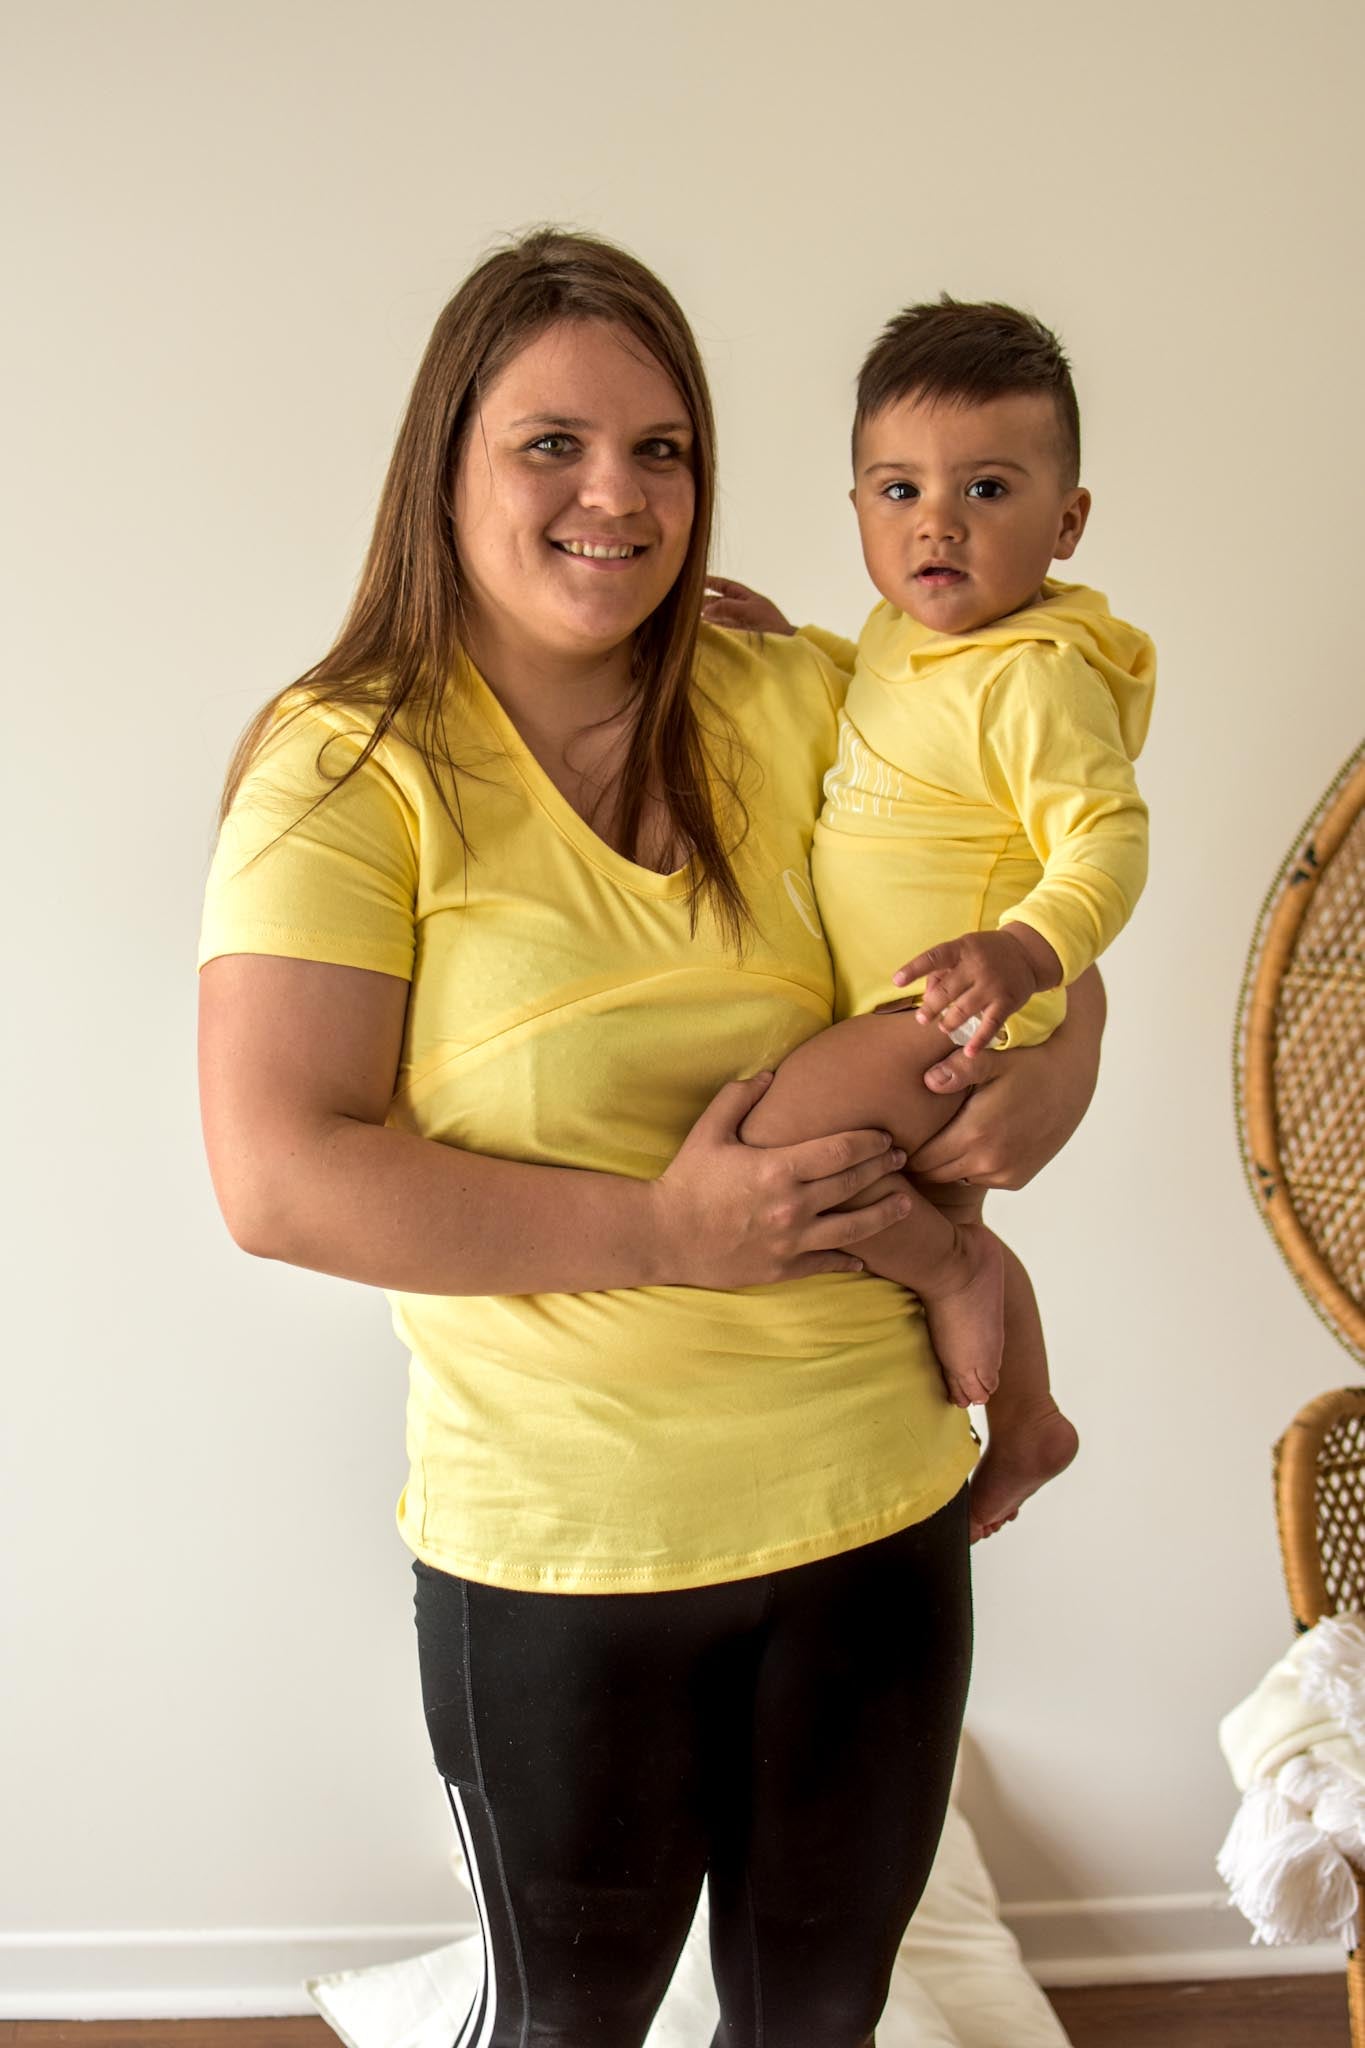 T-shirt Nine yellow printed oh yeah 3 in 1 maternity, breastfeeding and postpartum  Clothing